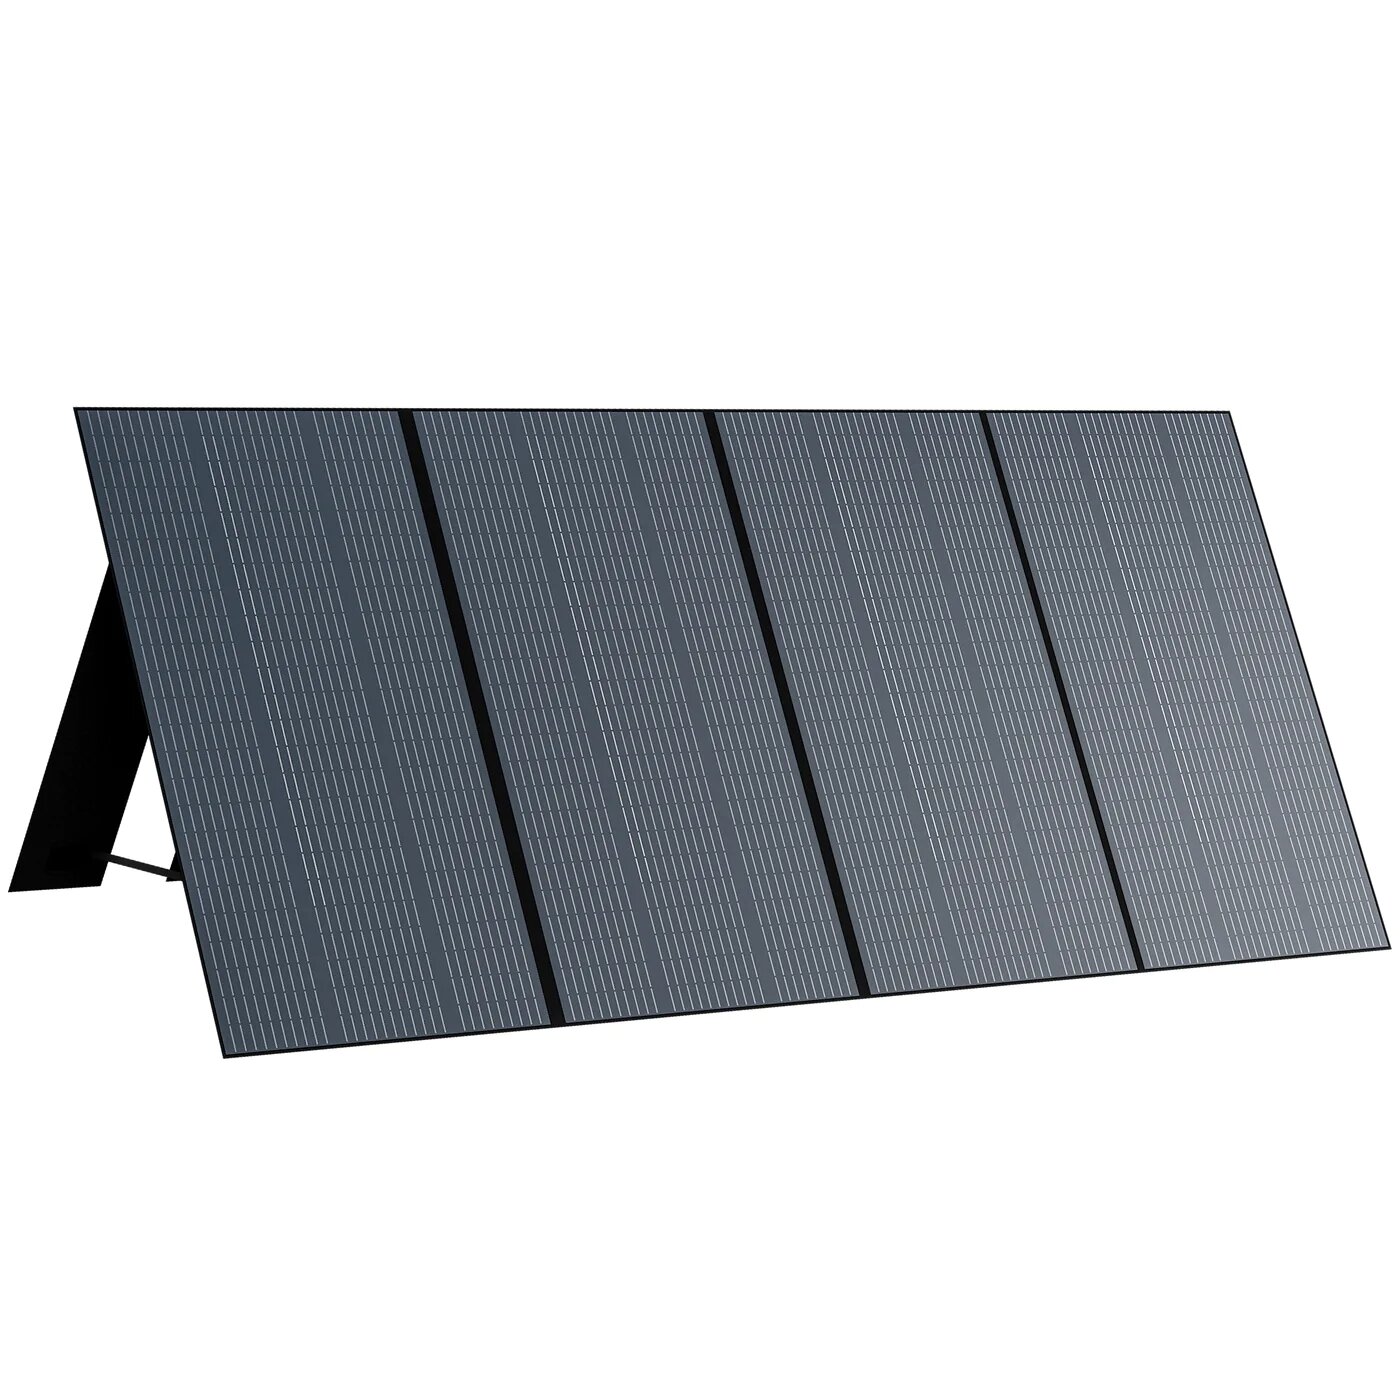 [EU Direct] BLUETTI PV350 350W Solar Panel 36V 9.7A Portable Solar Charger Conversion Rate Up To 23.4% 86.5*37*0.9inch